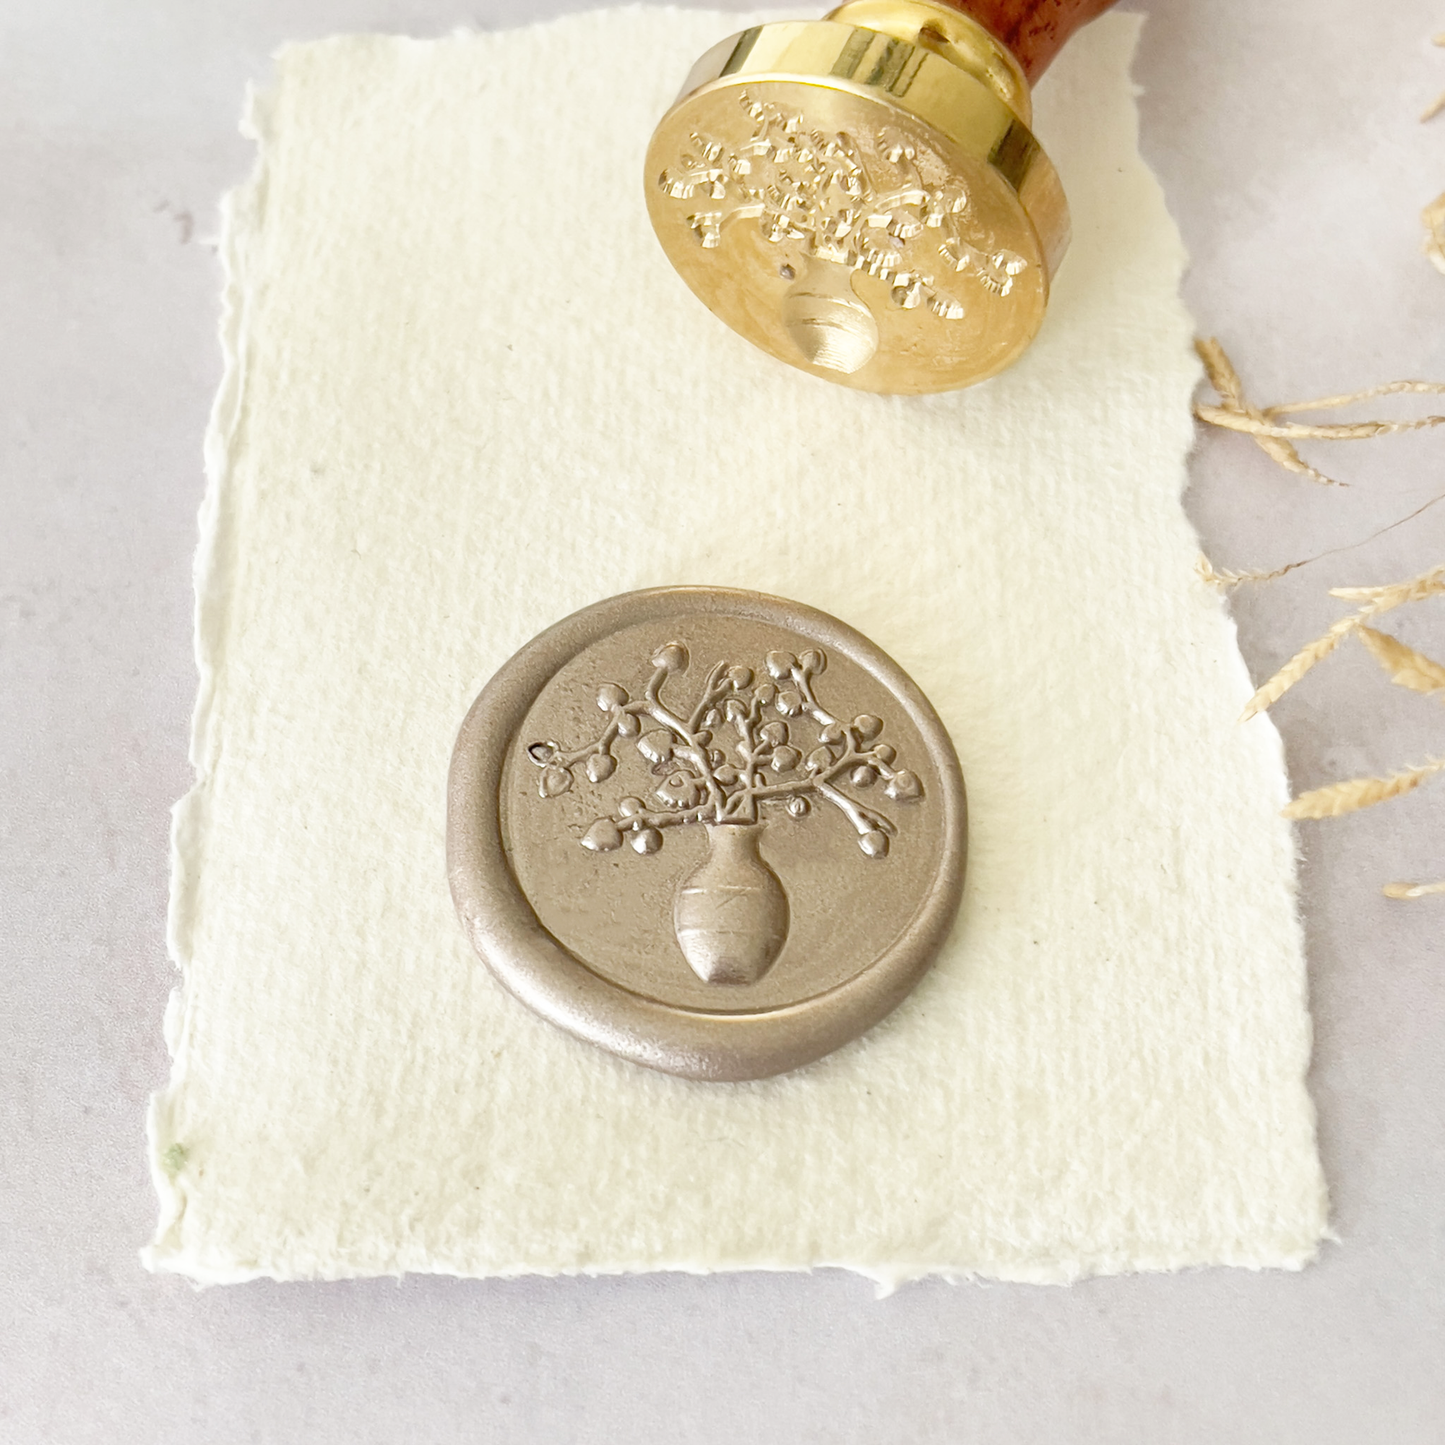 aphrodite-sealing-wax-stamp-with-vase-and-flowers